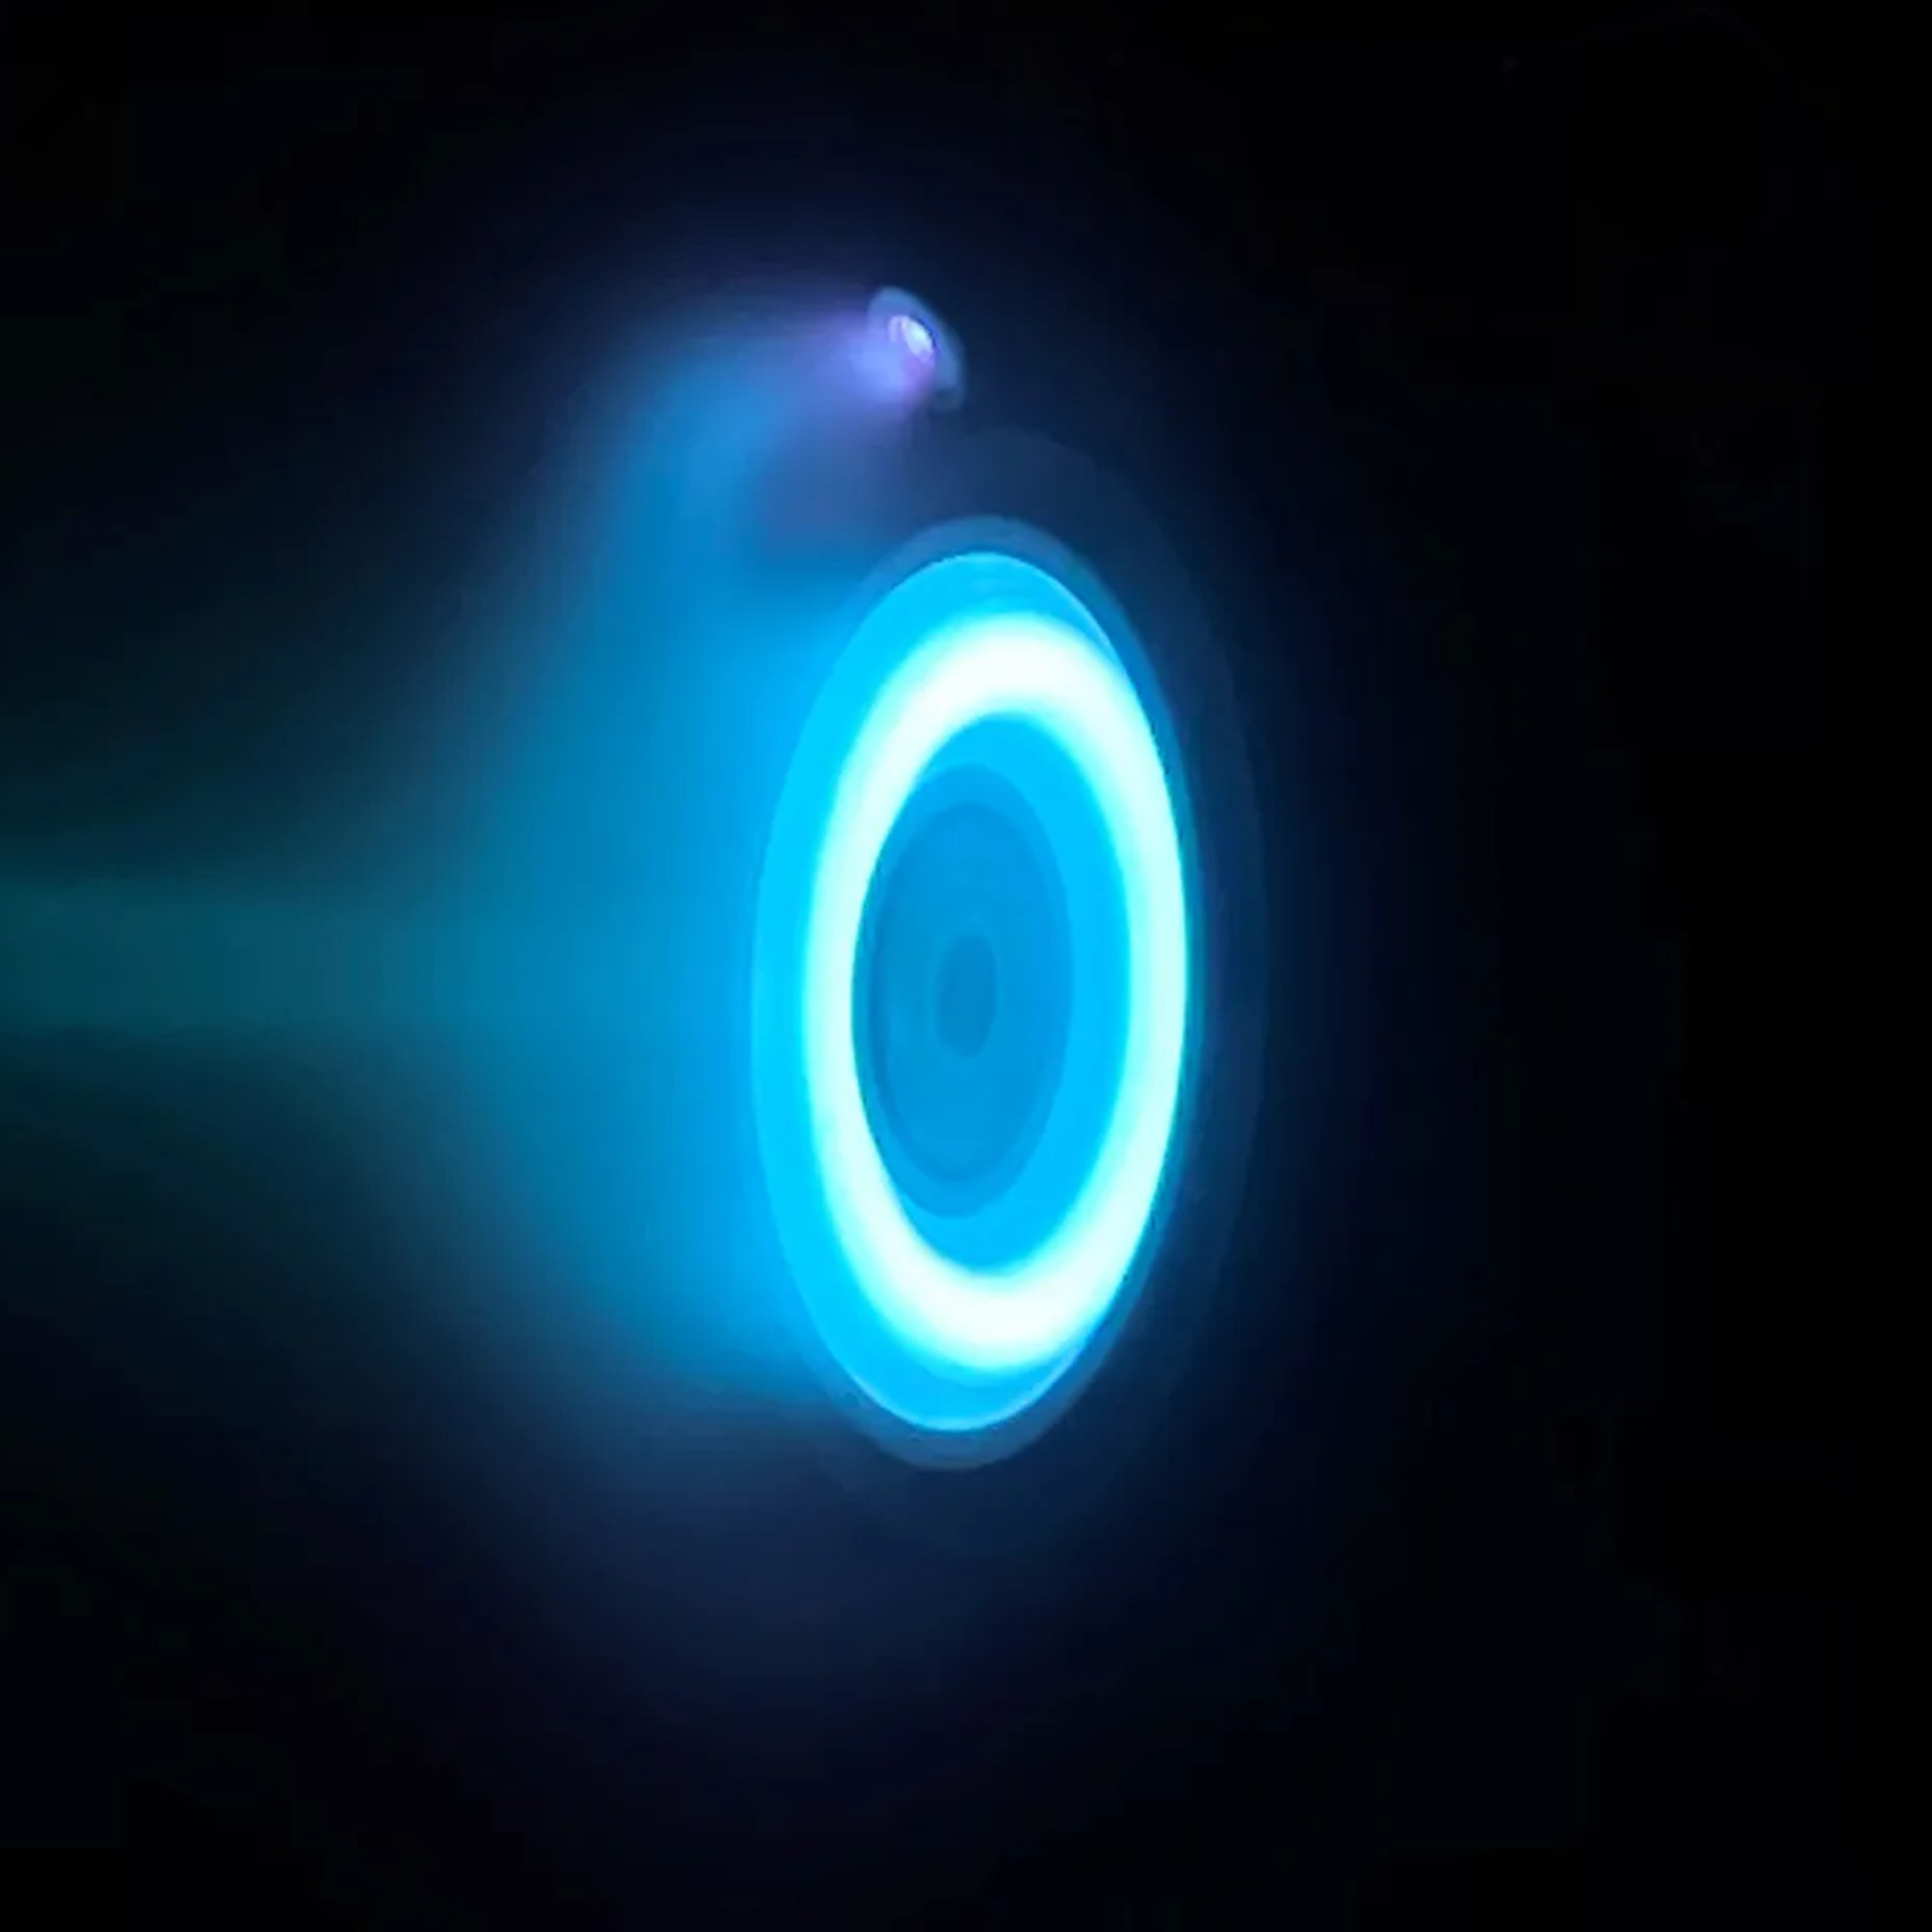 The glowing blue ring of an electric Hall thruster. in an otherwise black image.